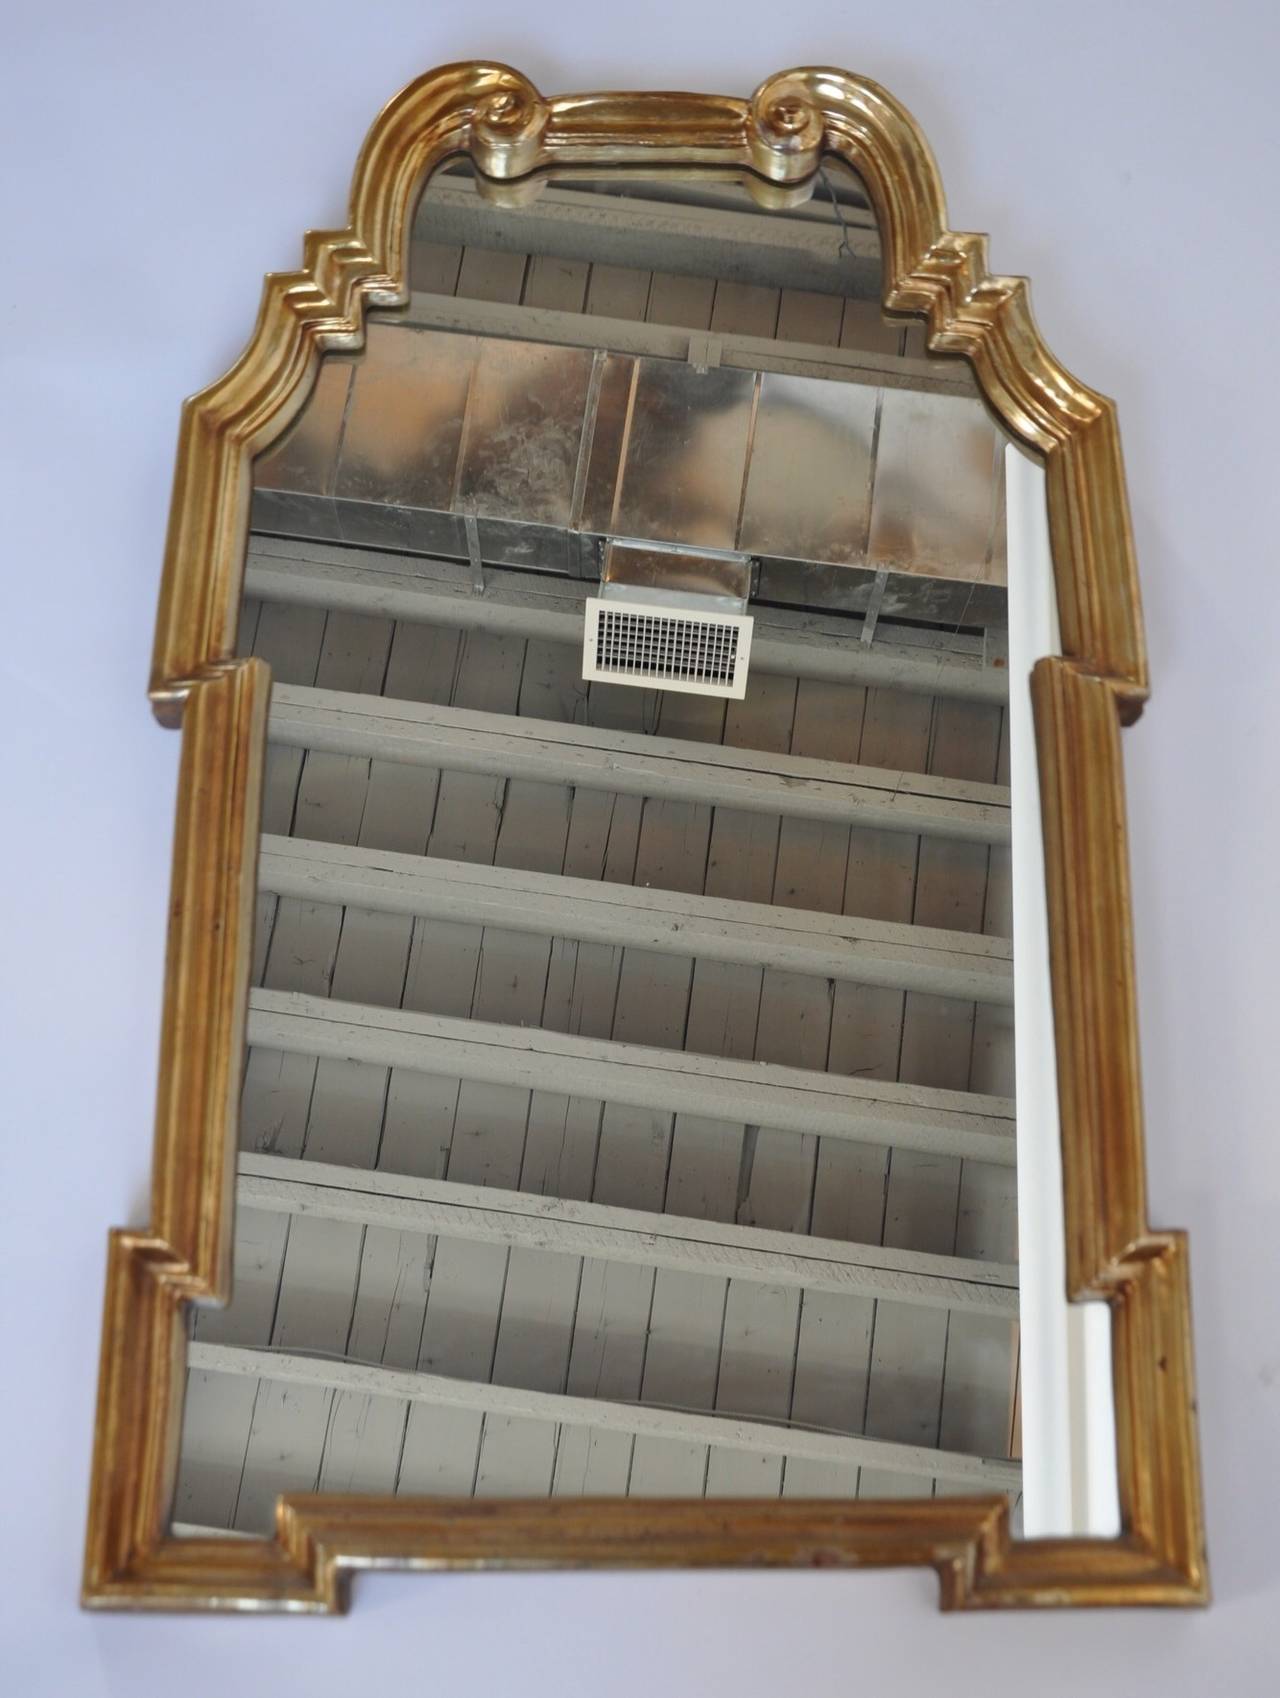 Hollywood Regency style gold gilt mirror by Labarge, c. 1970's. Note professional repair. A matching mirror is also available.